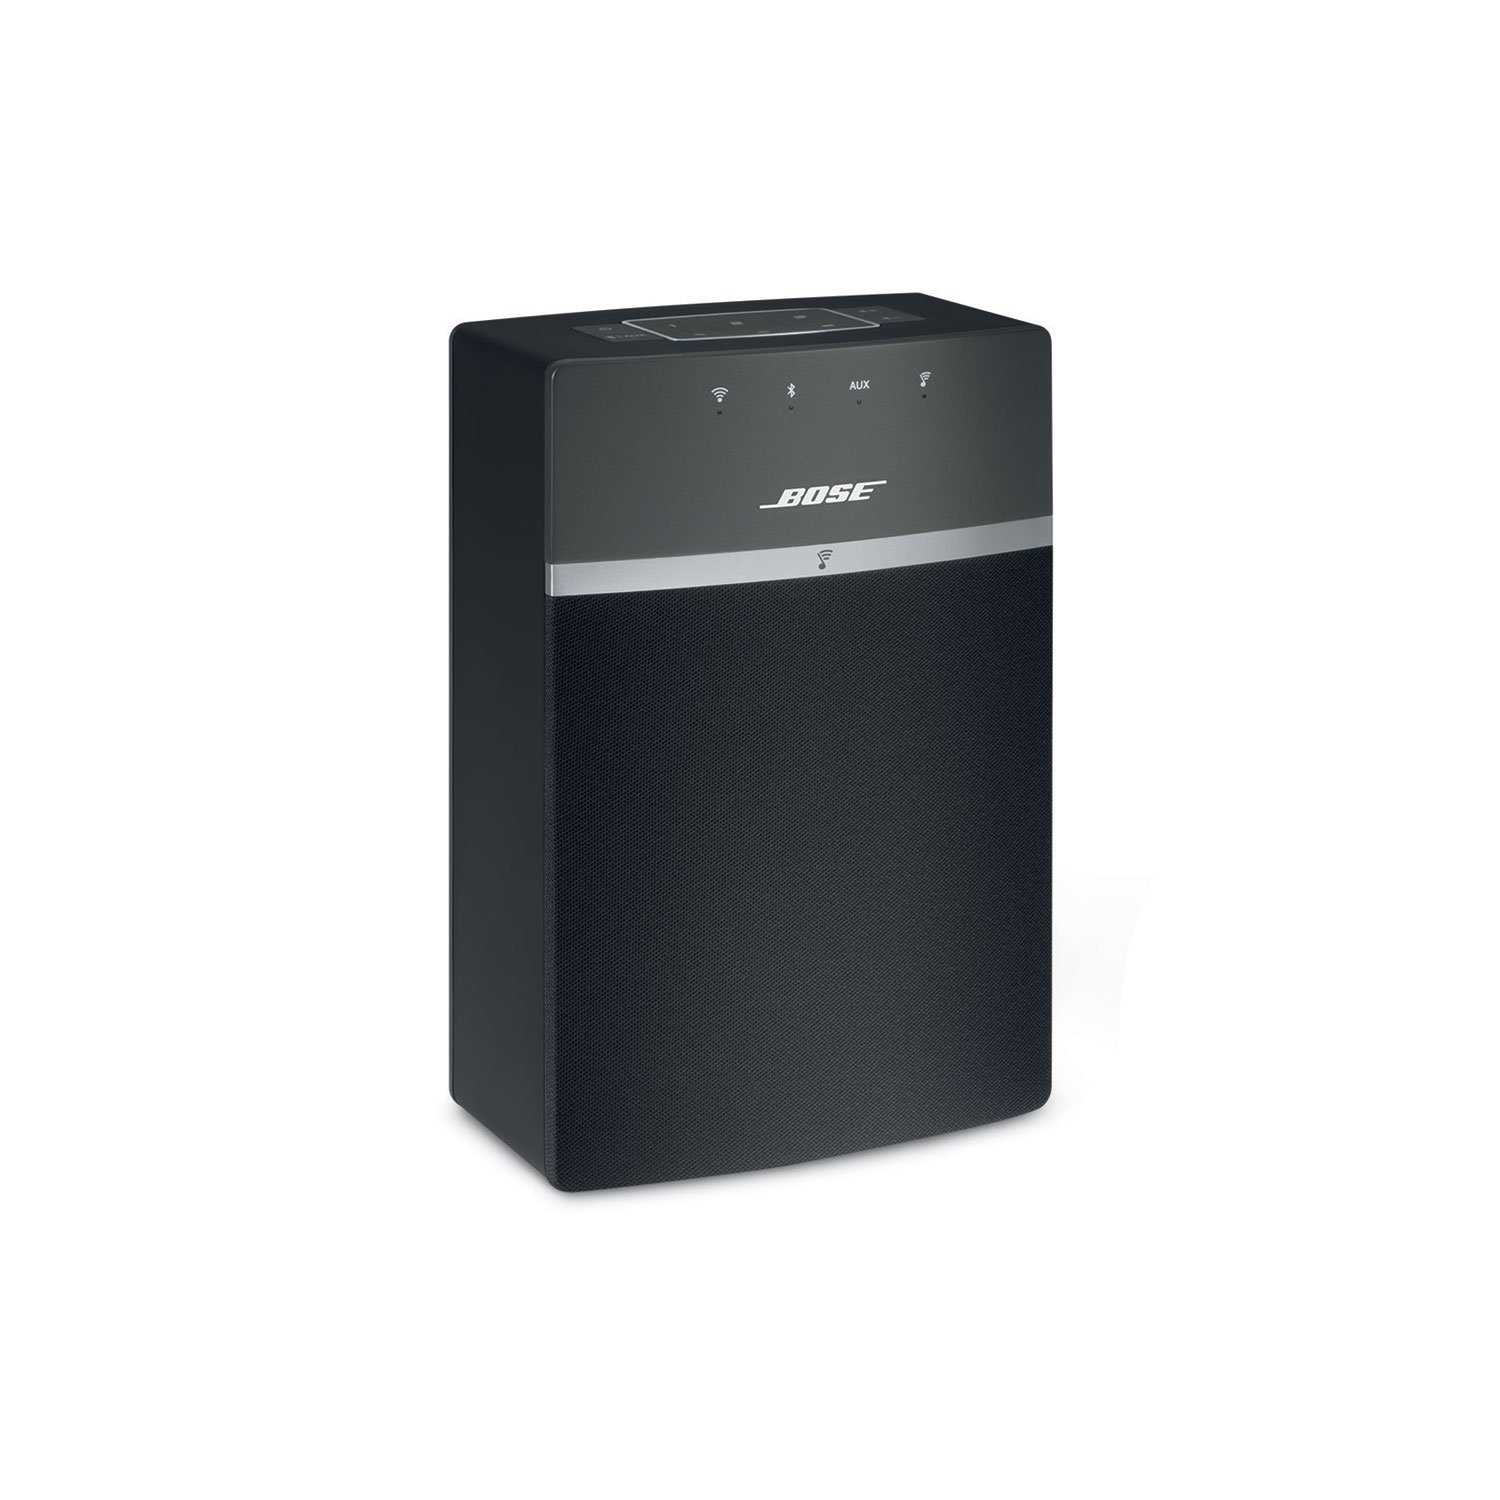 Select your SoundTouch 10 speaker from the Devices list.
Navigate to the "Settings" menu.